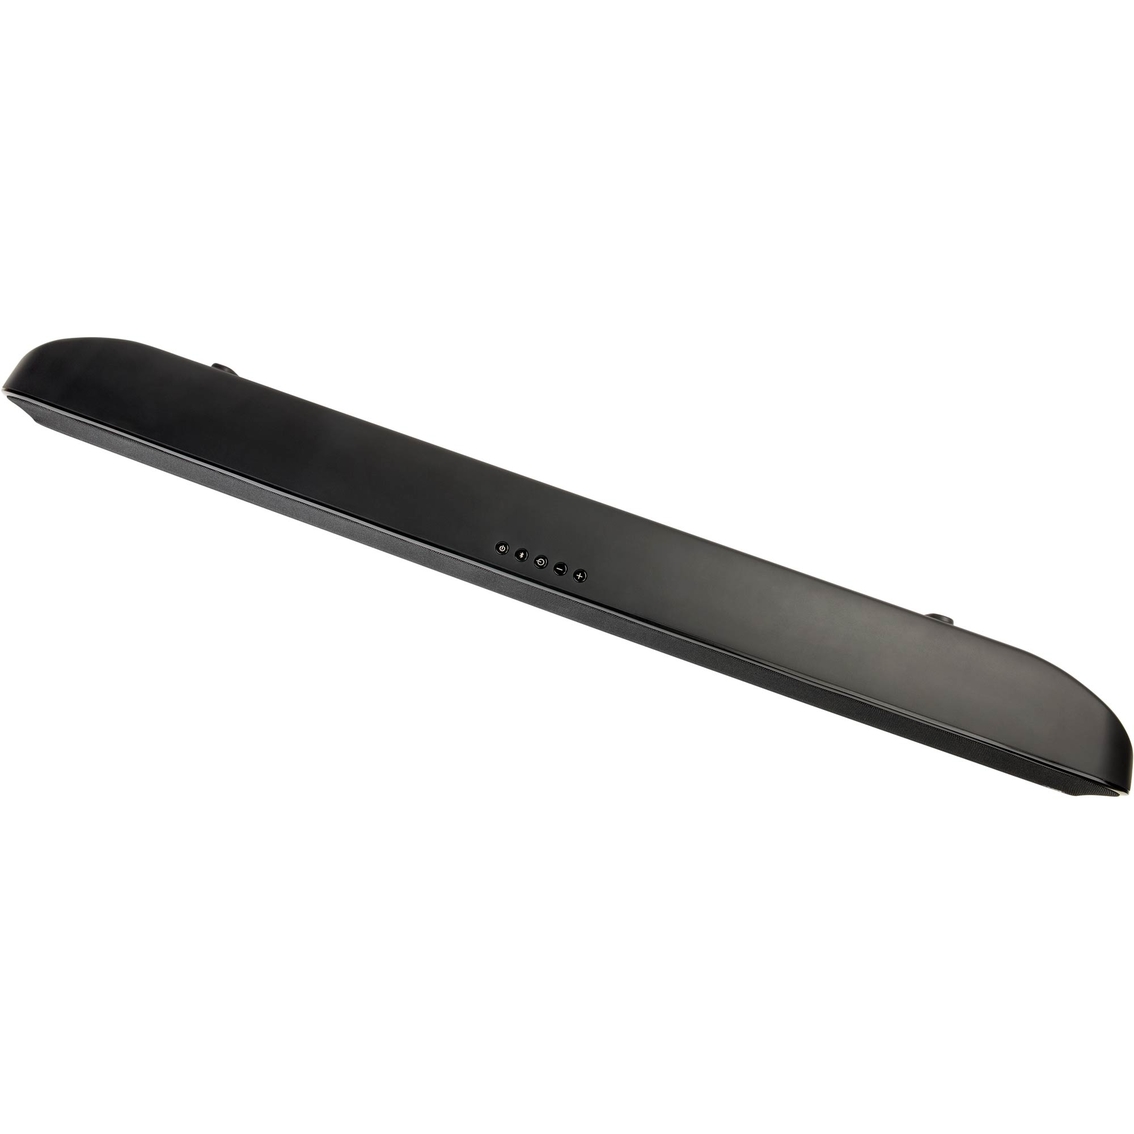 PolkAudio Signa Solo Universal Home Theater Sound Bar - Image 3 of 3